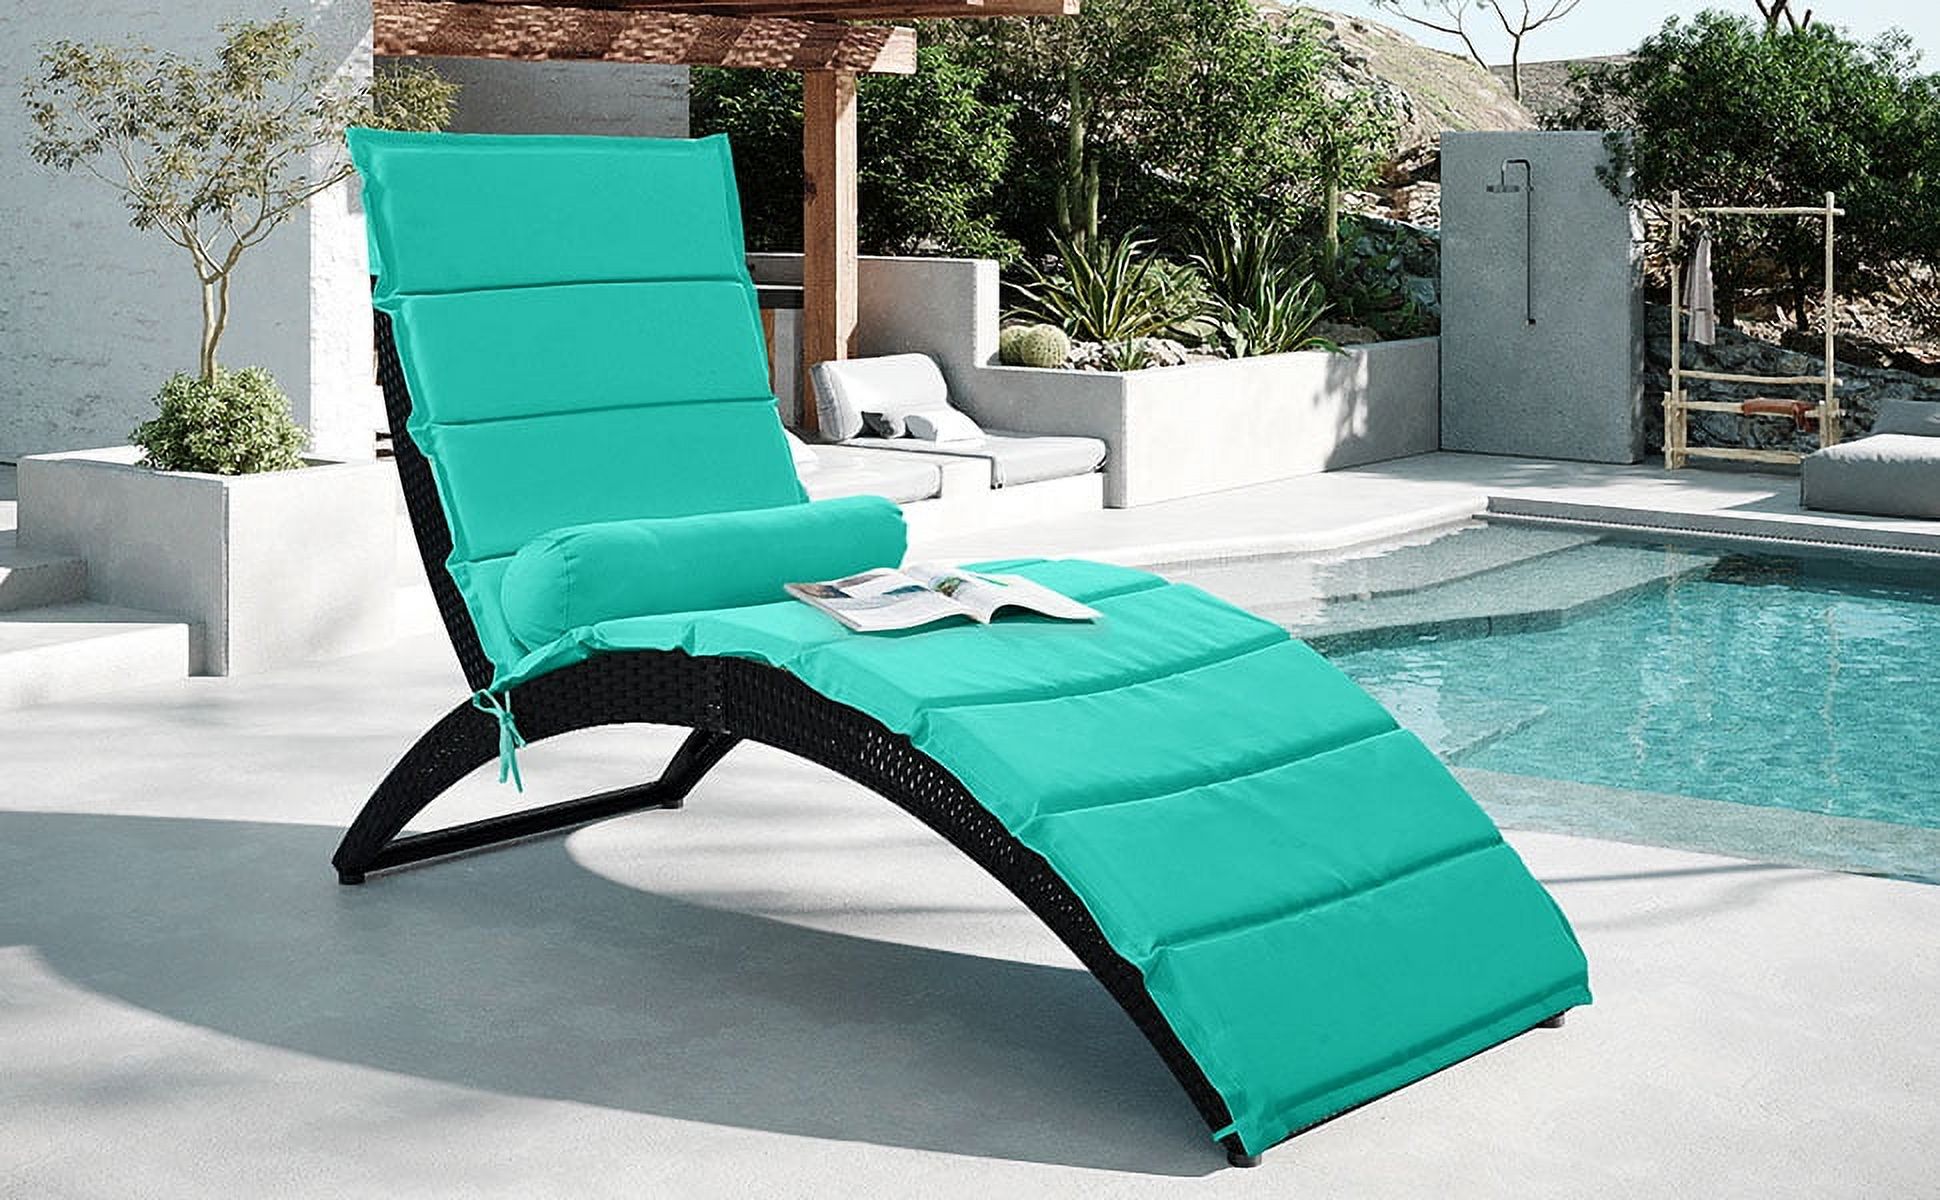 Patio Chaise Lounge, Reclining Camping Chair, PE Rattan Sun Recliner Chair with Seat Cushion, Poolside Garden Outdoor Chaise Lounge Chairs, JA1099 - image 2 of 8